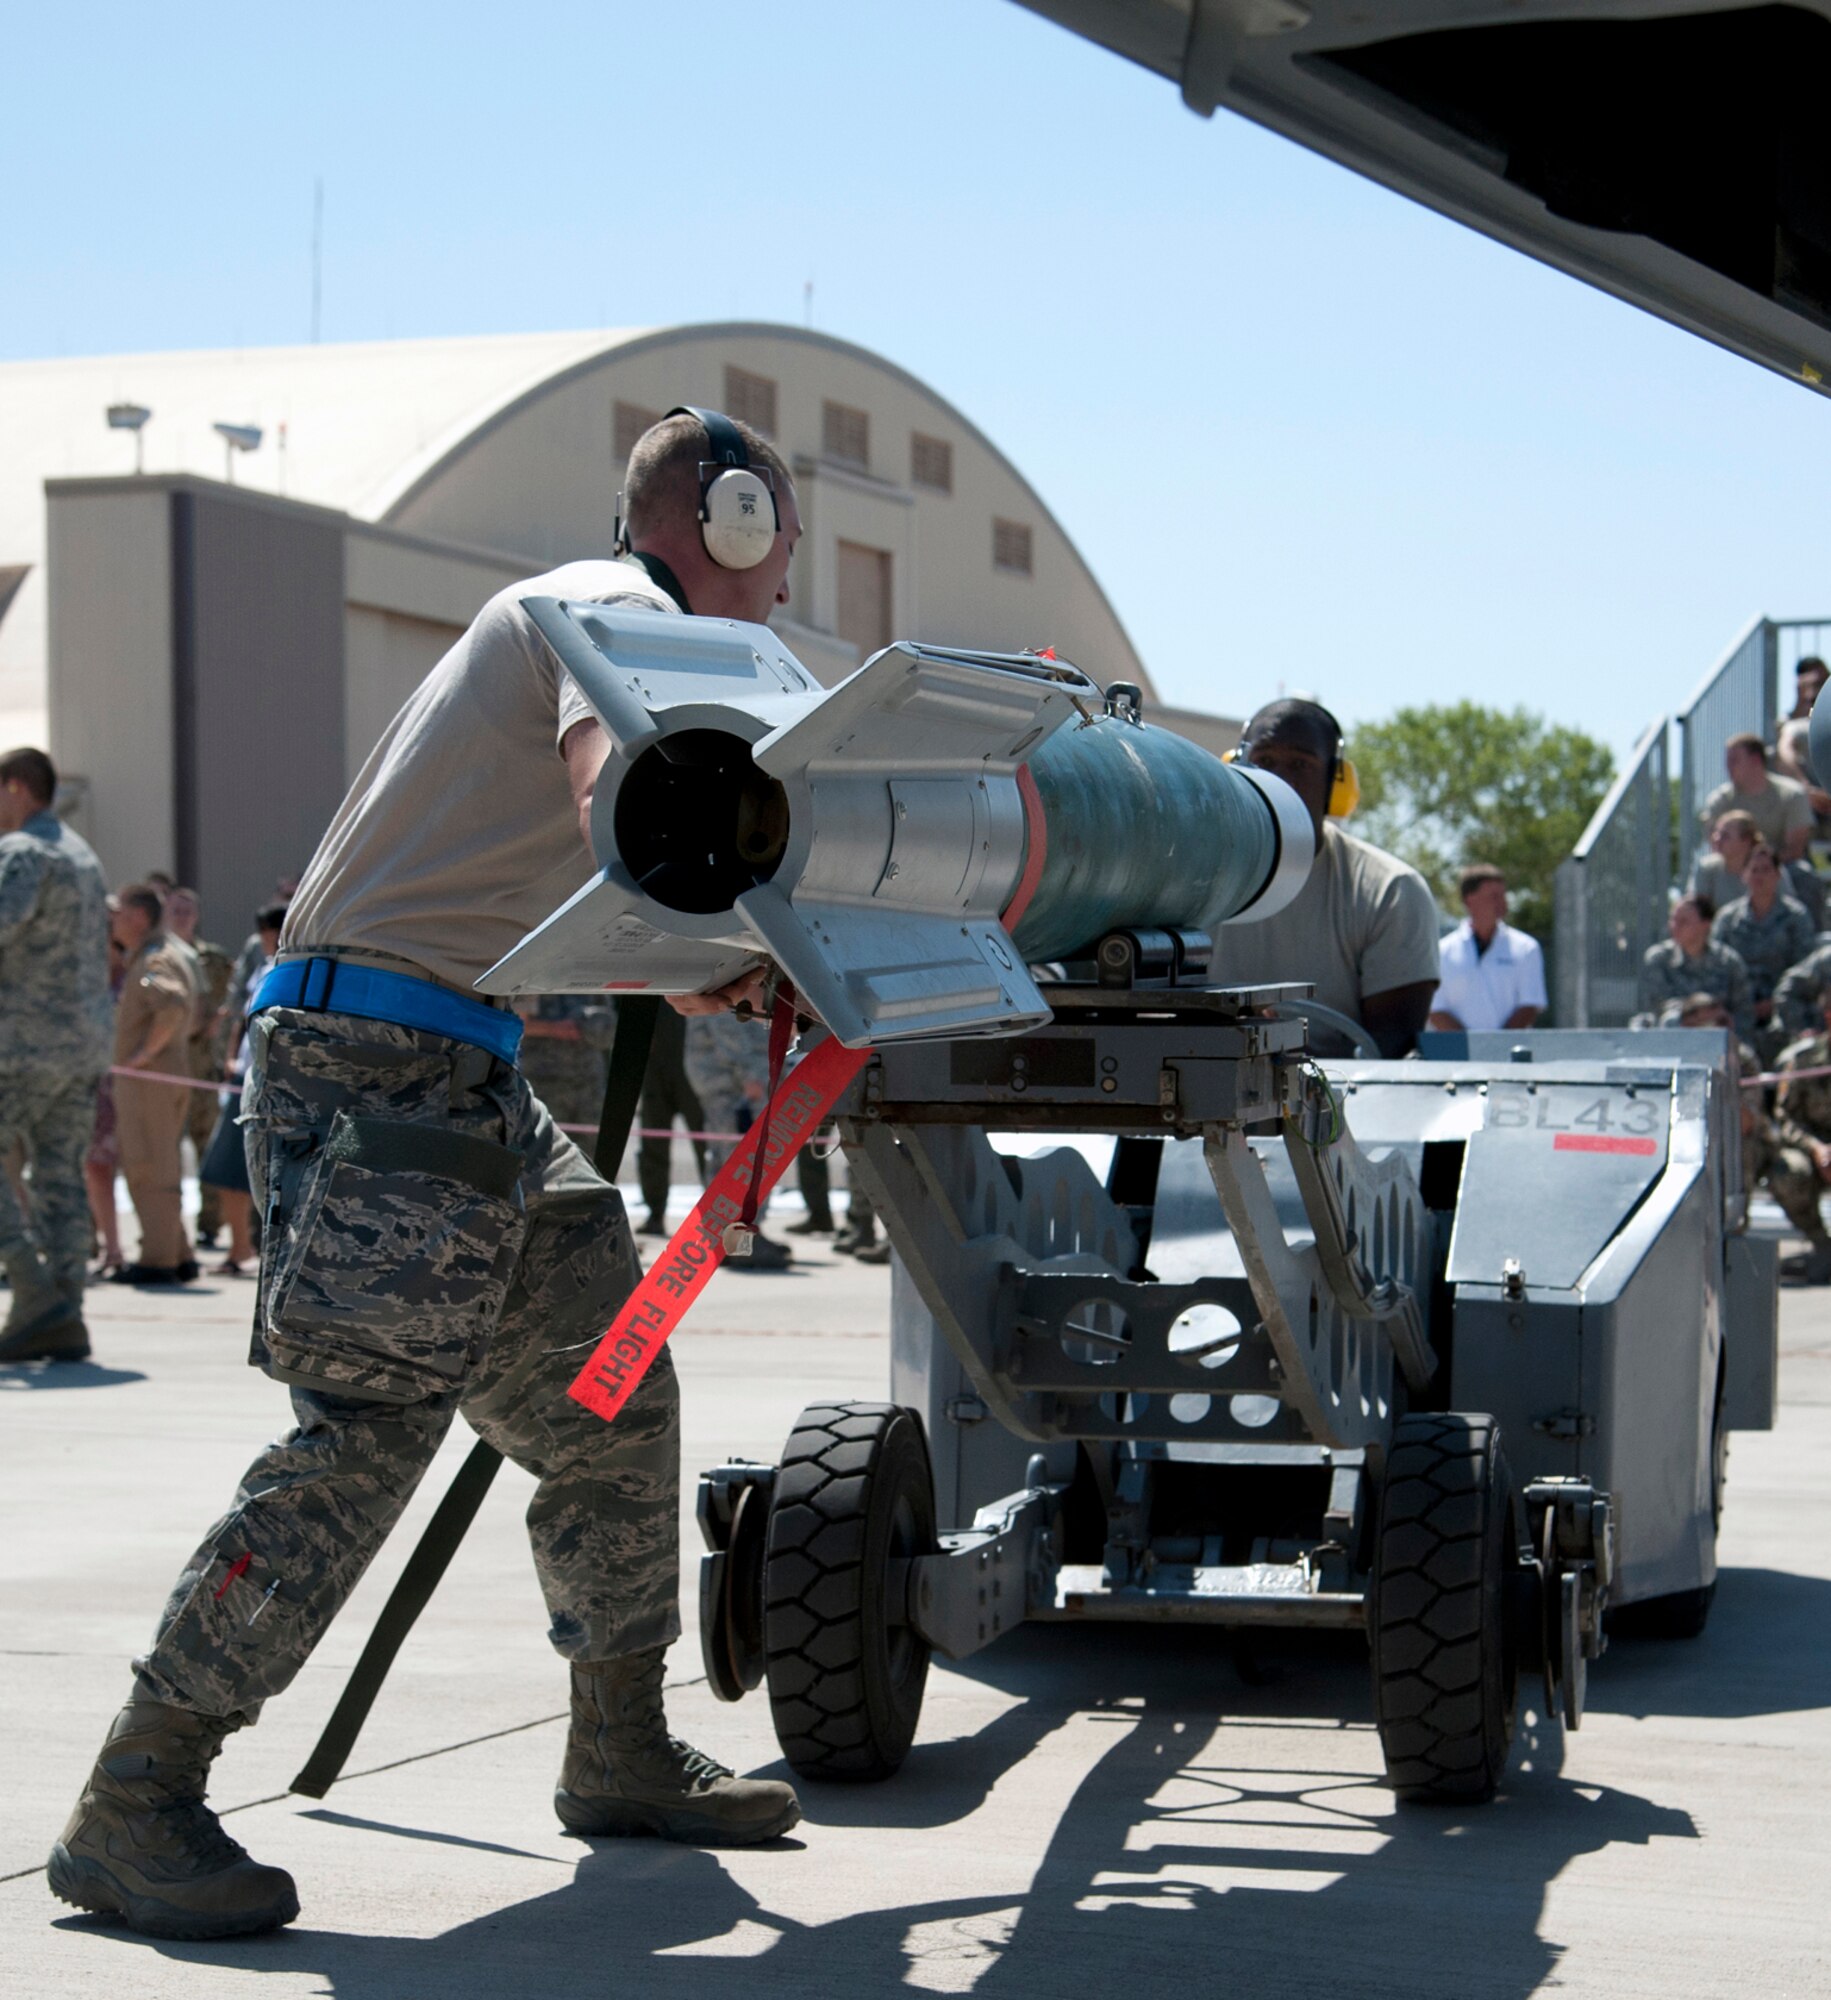 HOLLOMAN AIR FORCE BASE, N.M. -- A Staff Sergeant from the 49th Maintenance Group helps guide a GBU-12 Laser Guided Bomb being carried by an MJ-1 Jammer, driven by another Staff Sergeant from the 49th Maintenance Group, July 8, 2011, during a quarterly load crew competition. During a competition, each member has a set of tasks to carry out and work in teams of three or four, depending on the aircraft. This particular load crew competition was Holloman’s first to feature a German Air Force load crew. (U.S. Air Force photo by Airman 1st Class Siuta B. Ika/Released)